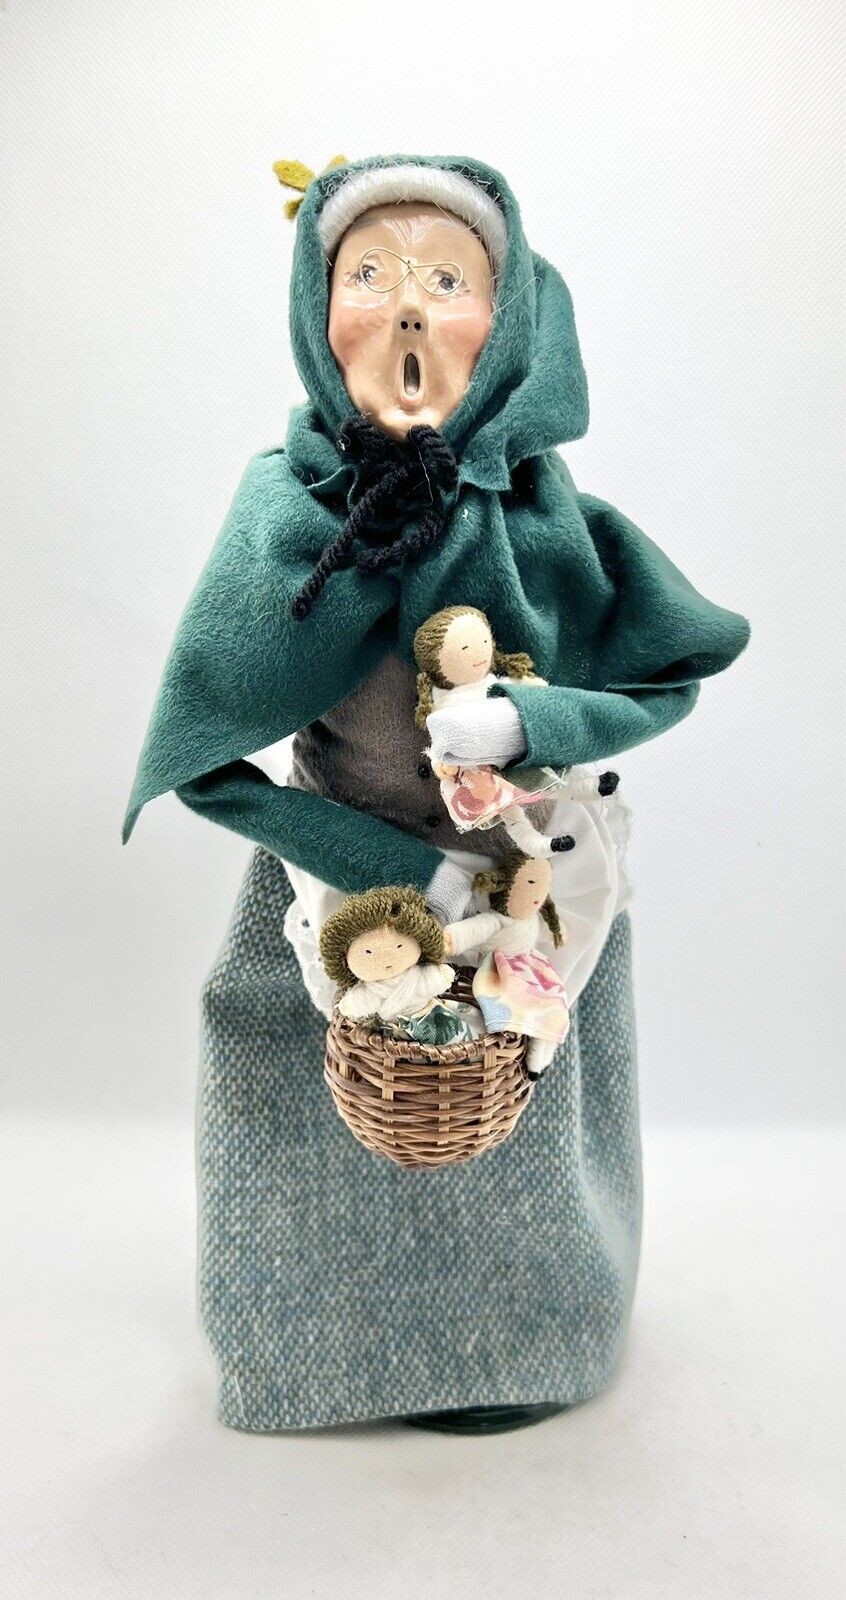 Vintage 1995 BYERS CHOICE CAROLERS Cries of London Woman Basket of Dolls